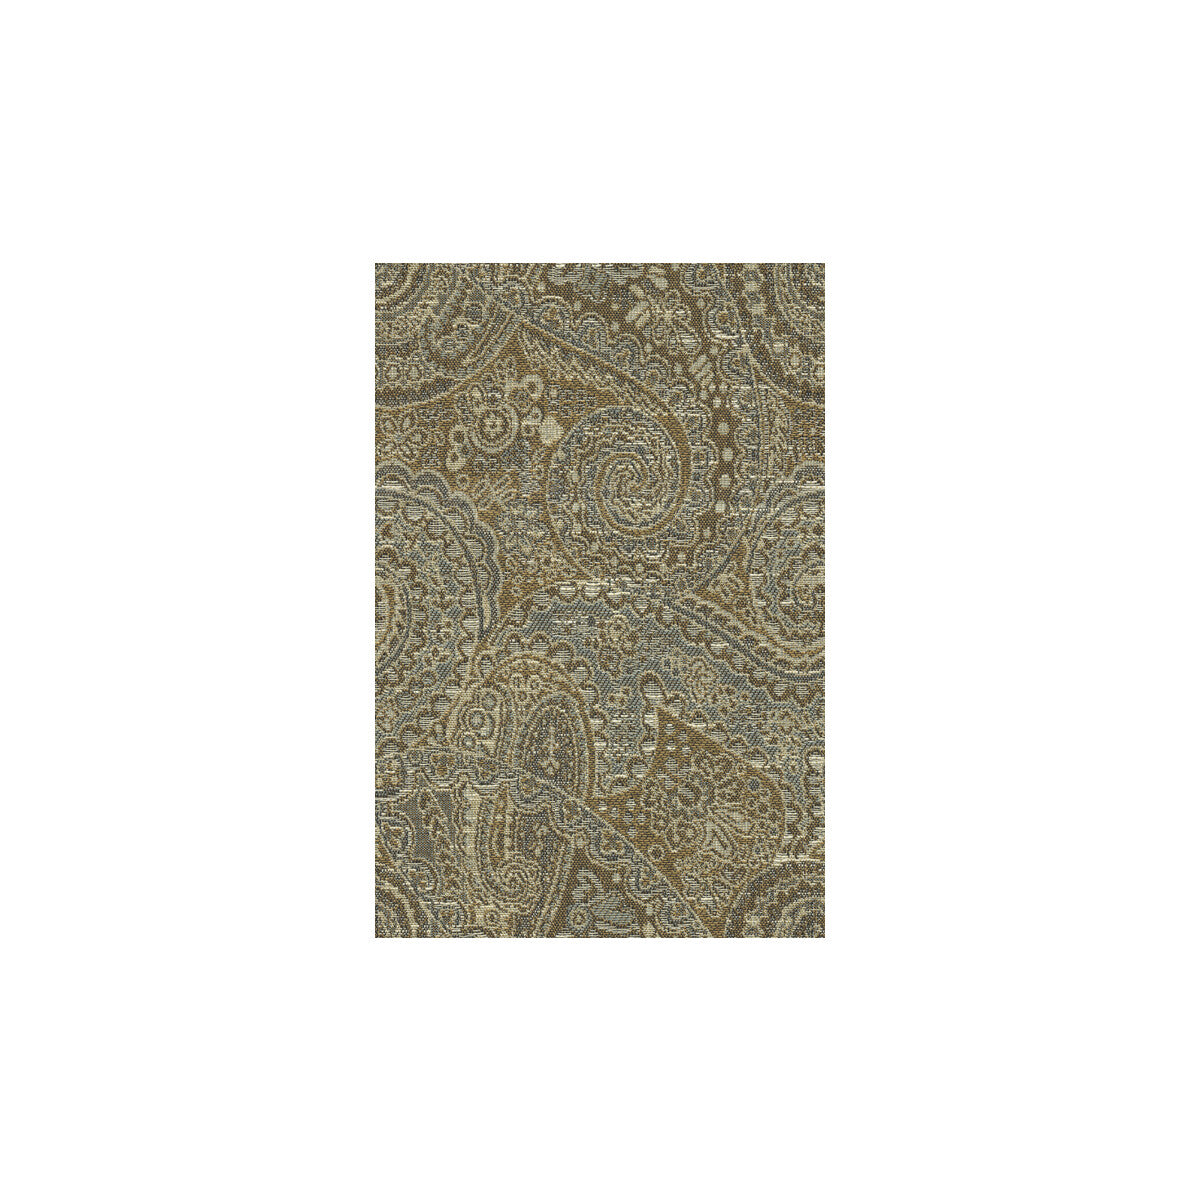 Kasan fabric in bracken color - pattern 31524.615.0 - by Kravet Contract in the Gis Crypton collection